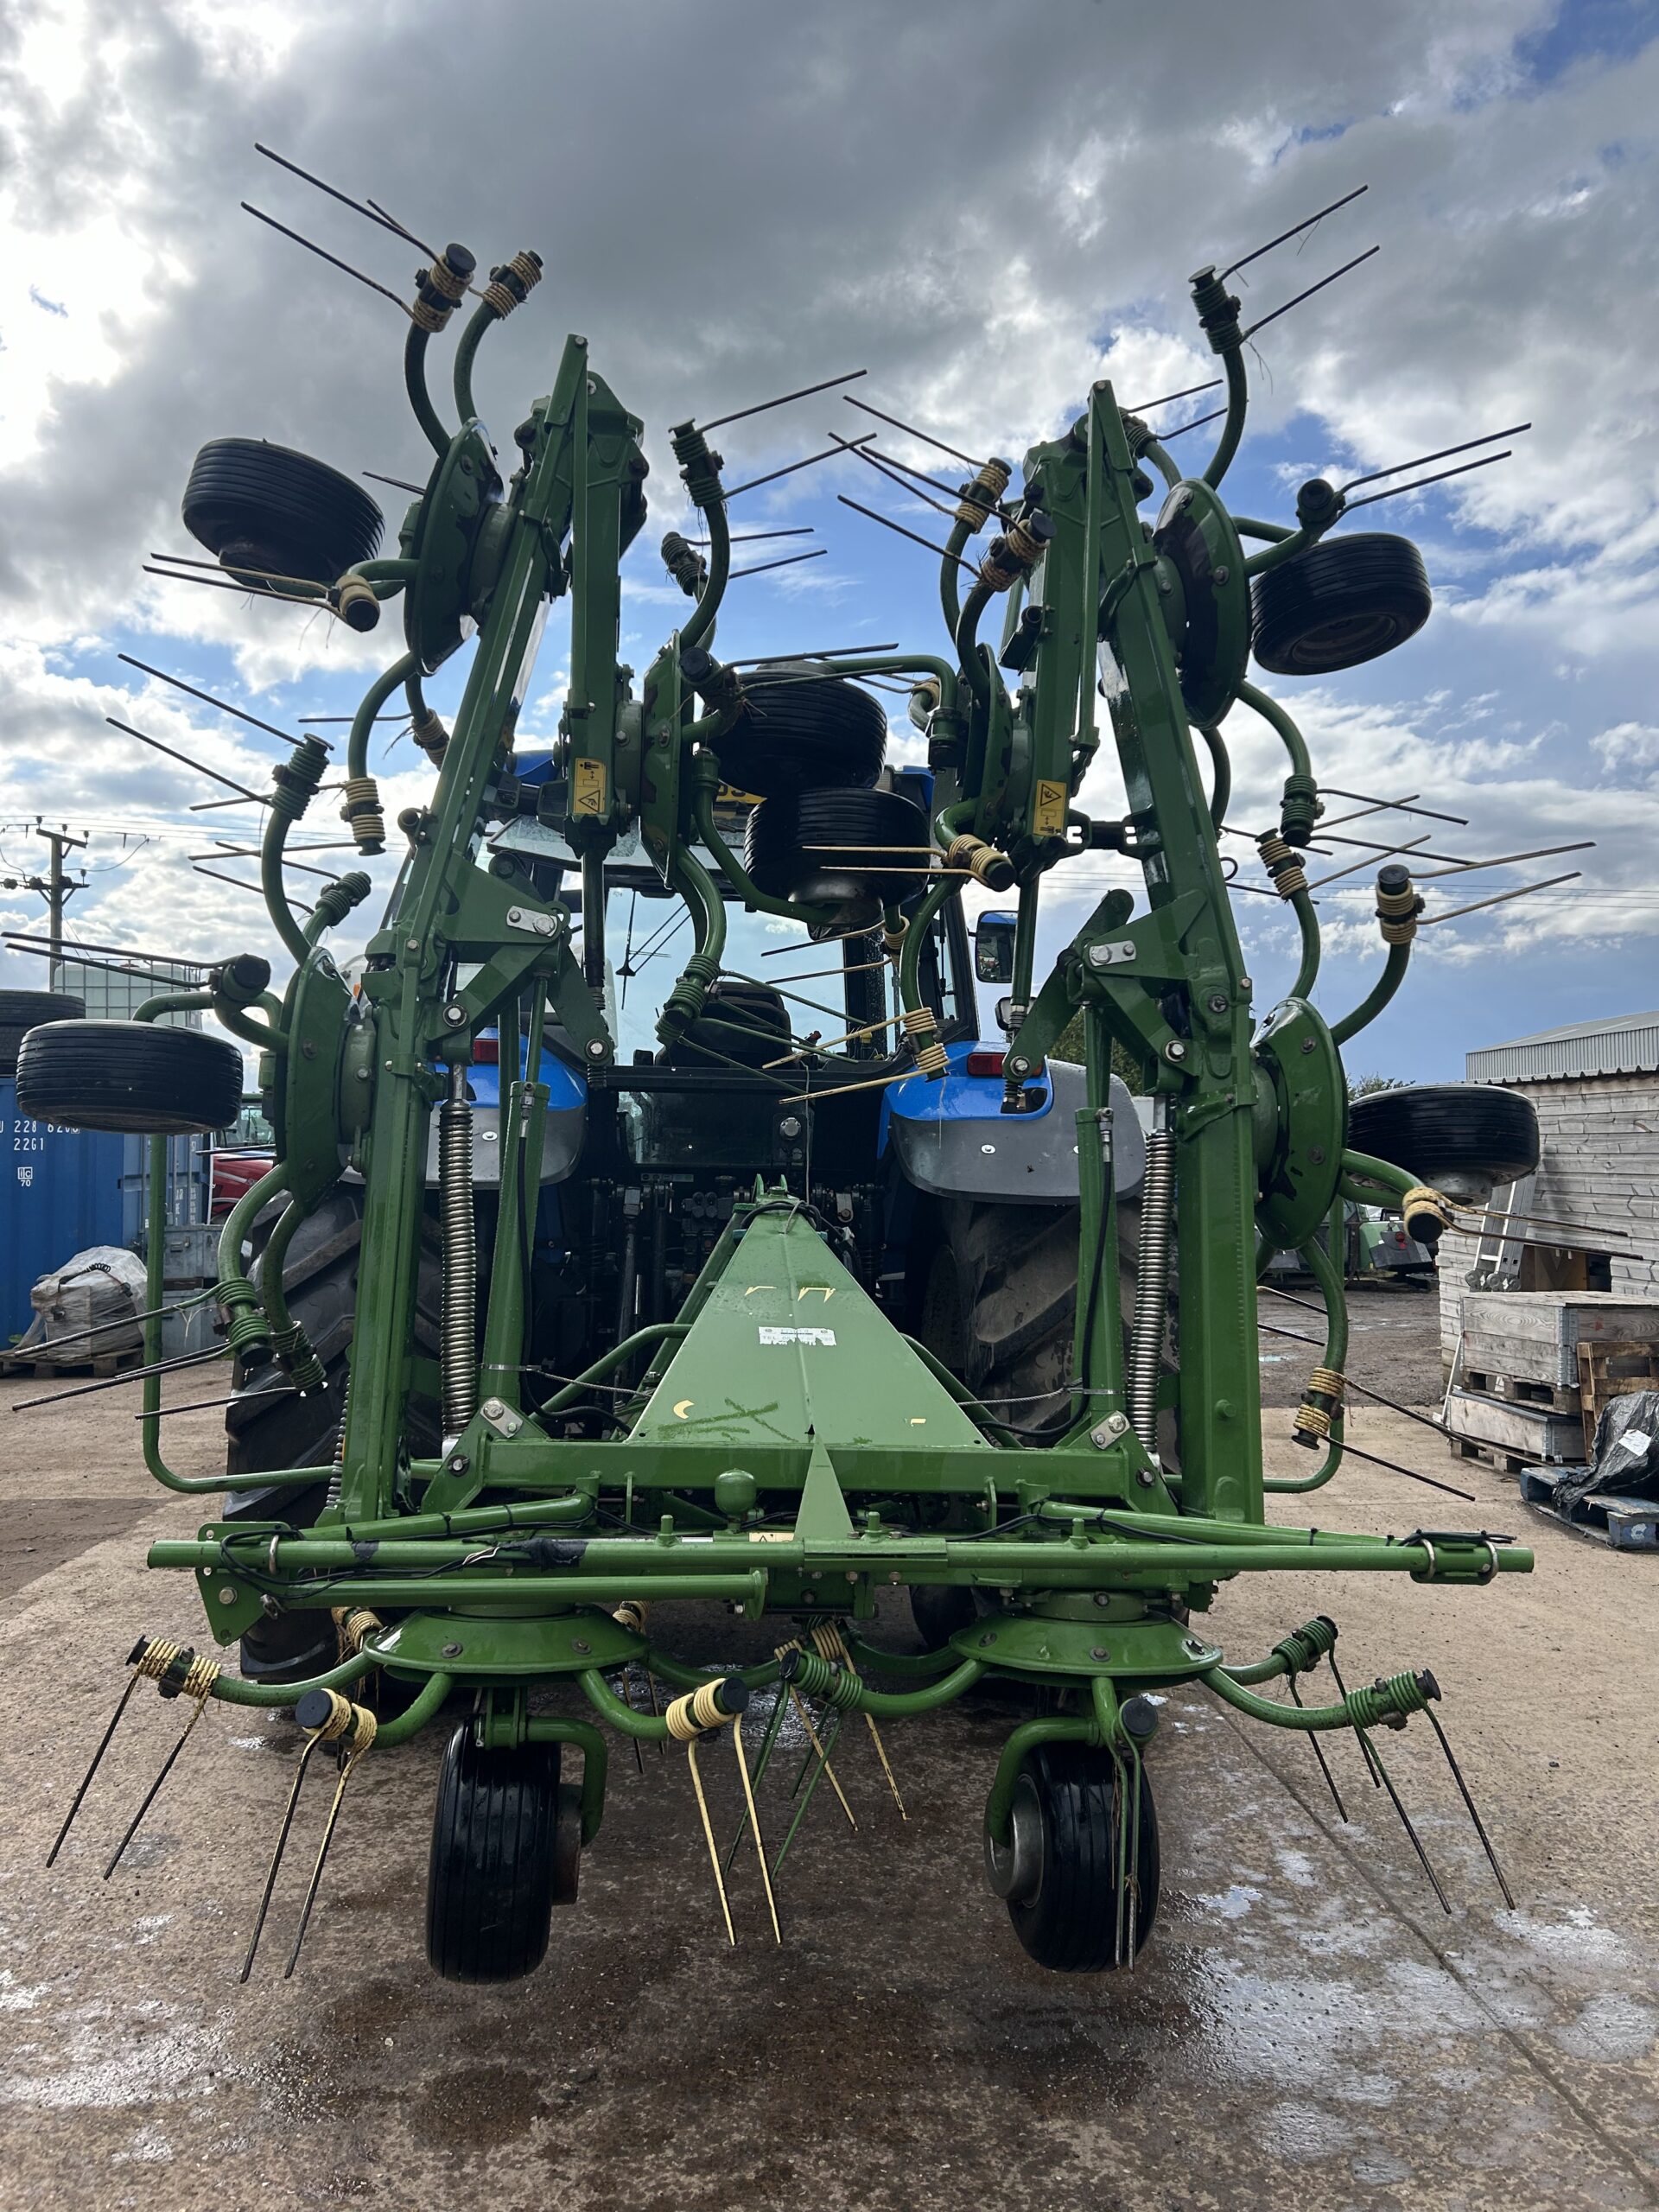 2012 Krone KW 8.82 Grass Tedder 8.8m 8 Rotor Good condition for age.